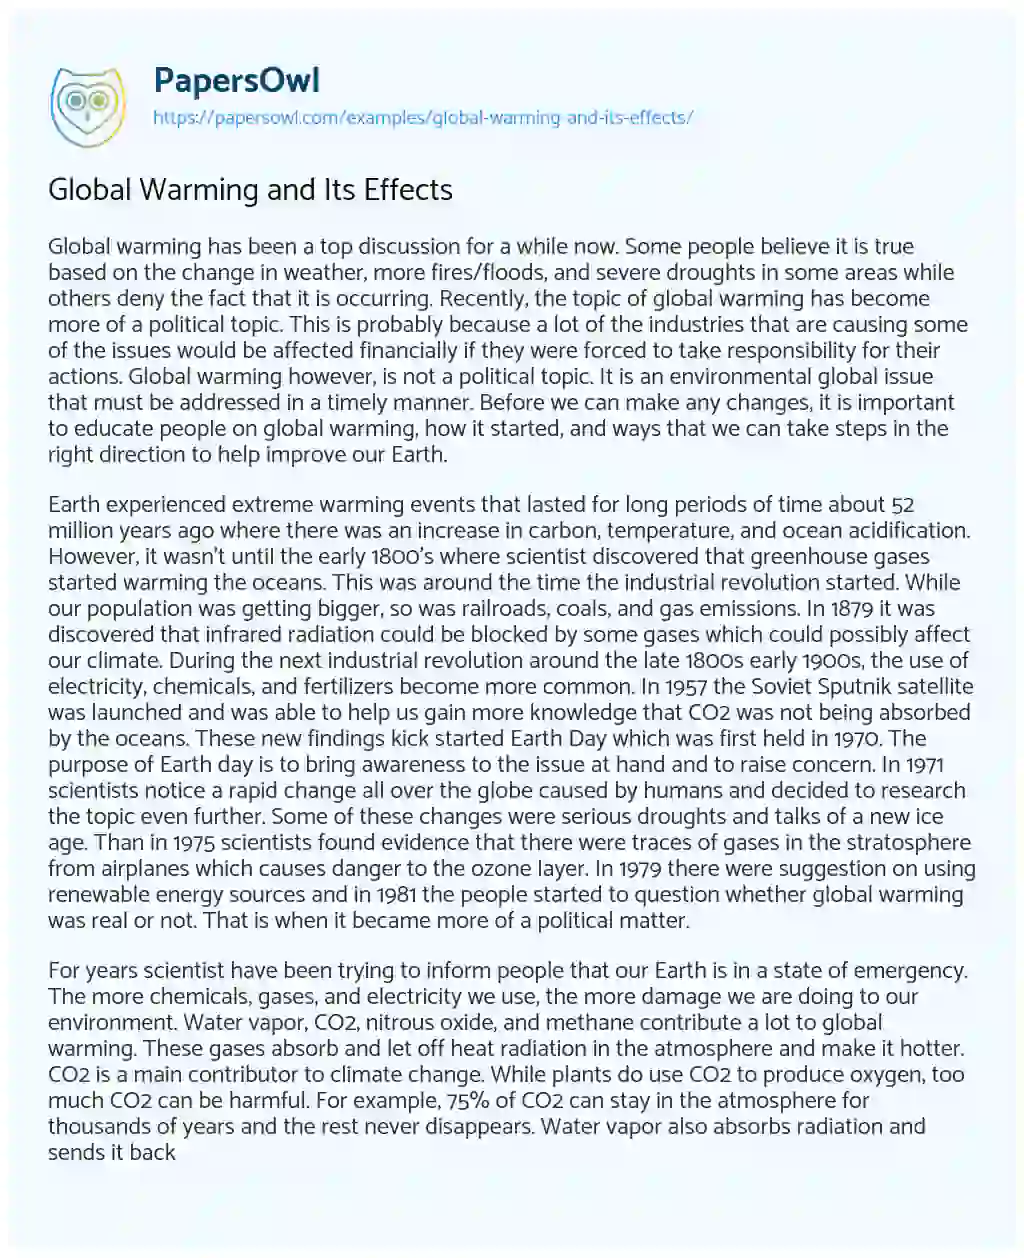 Global Warming and its Effects essay